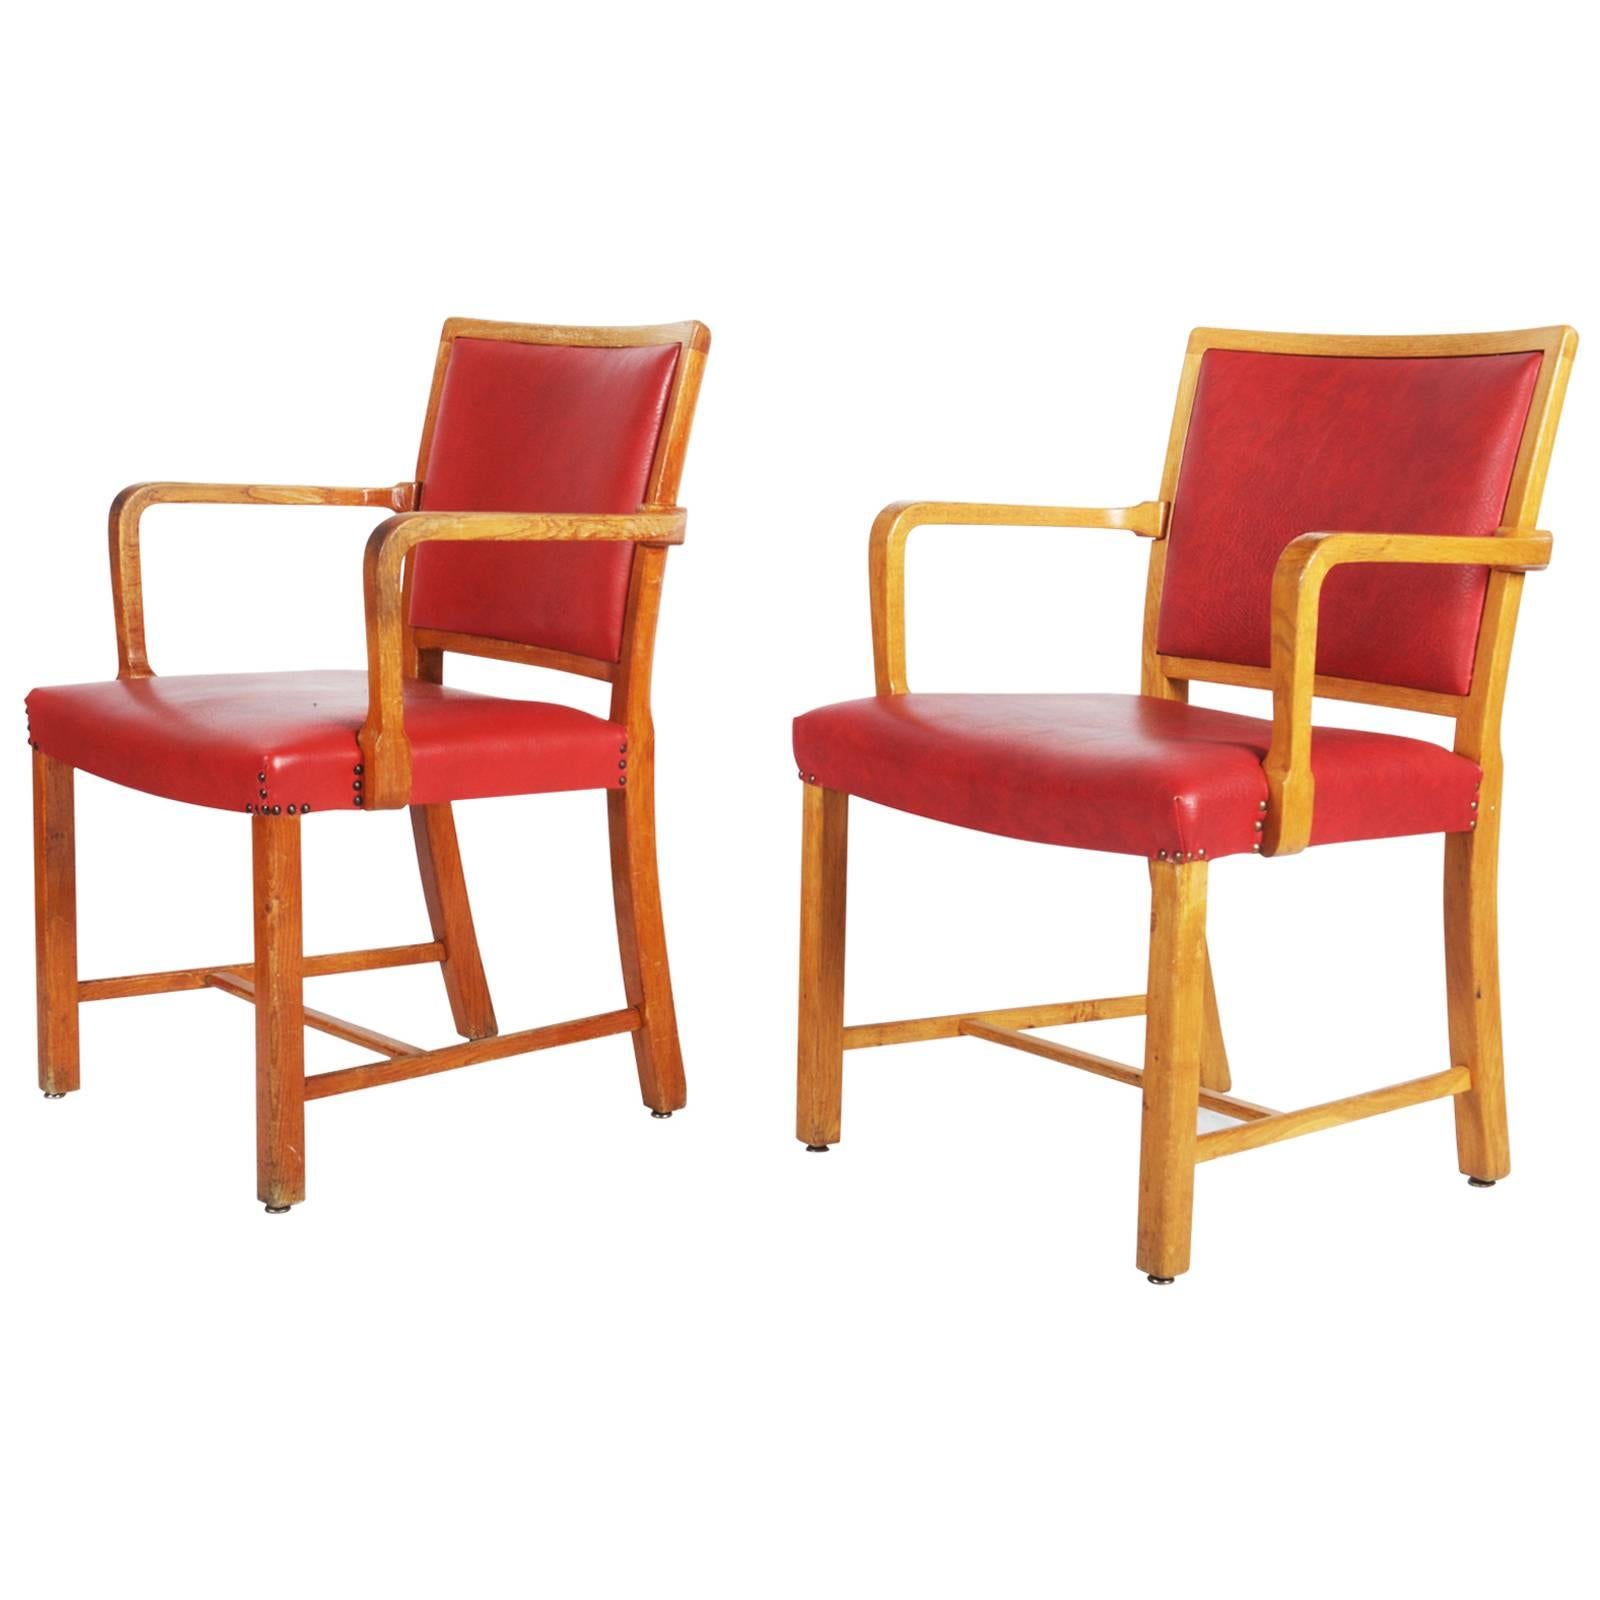 Extremely rare armchairs, frame made of lacquered oak and upholstered in red artificial leather. Character as part of the original furniture to the State Hospital in Sønderborg, as Mogens Koch drew in 1936.
Very used and have to be restored and